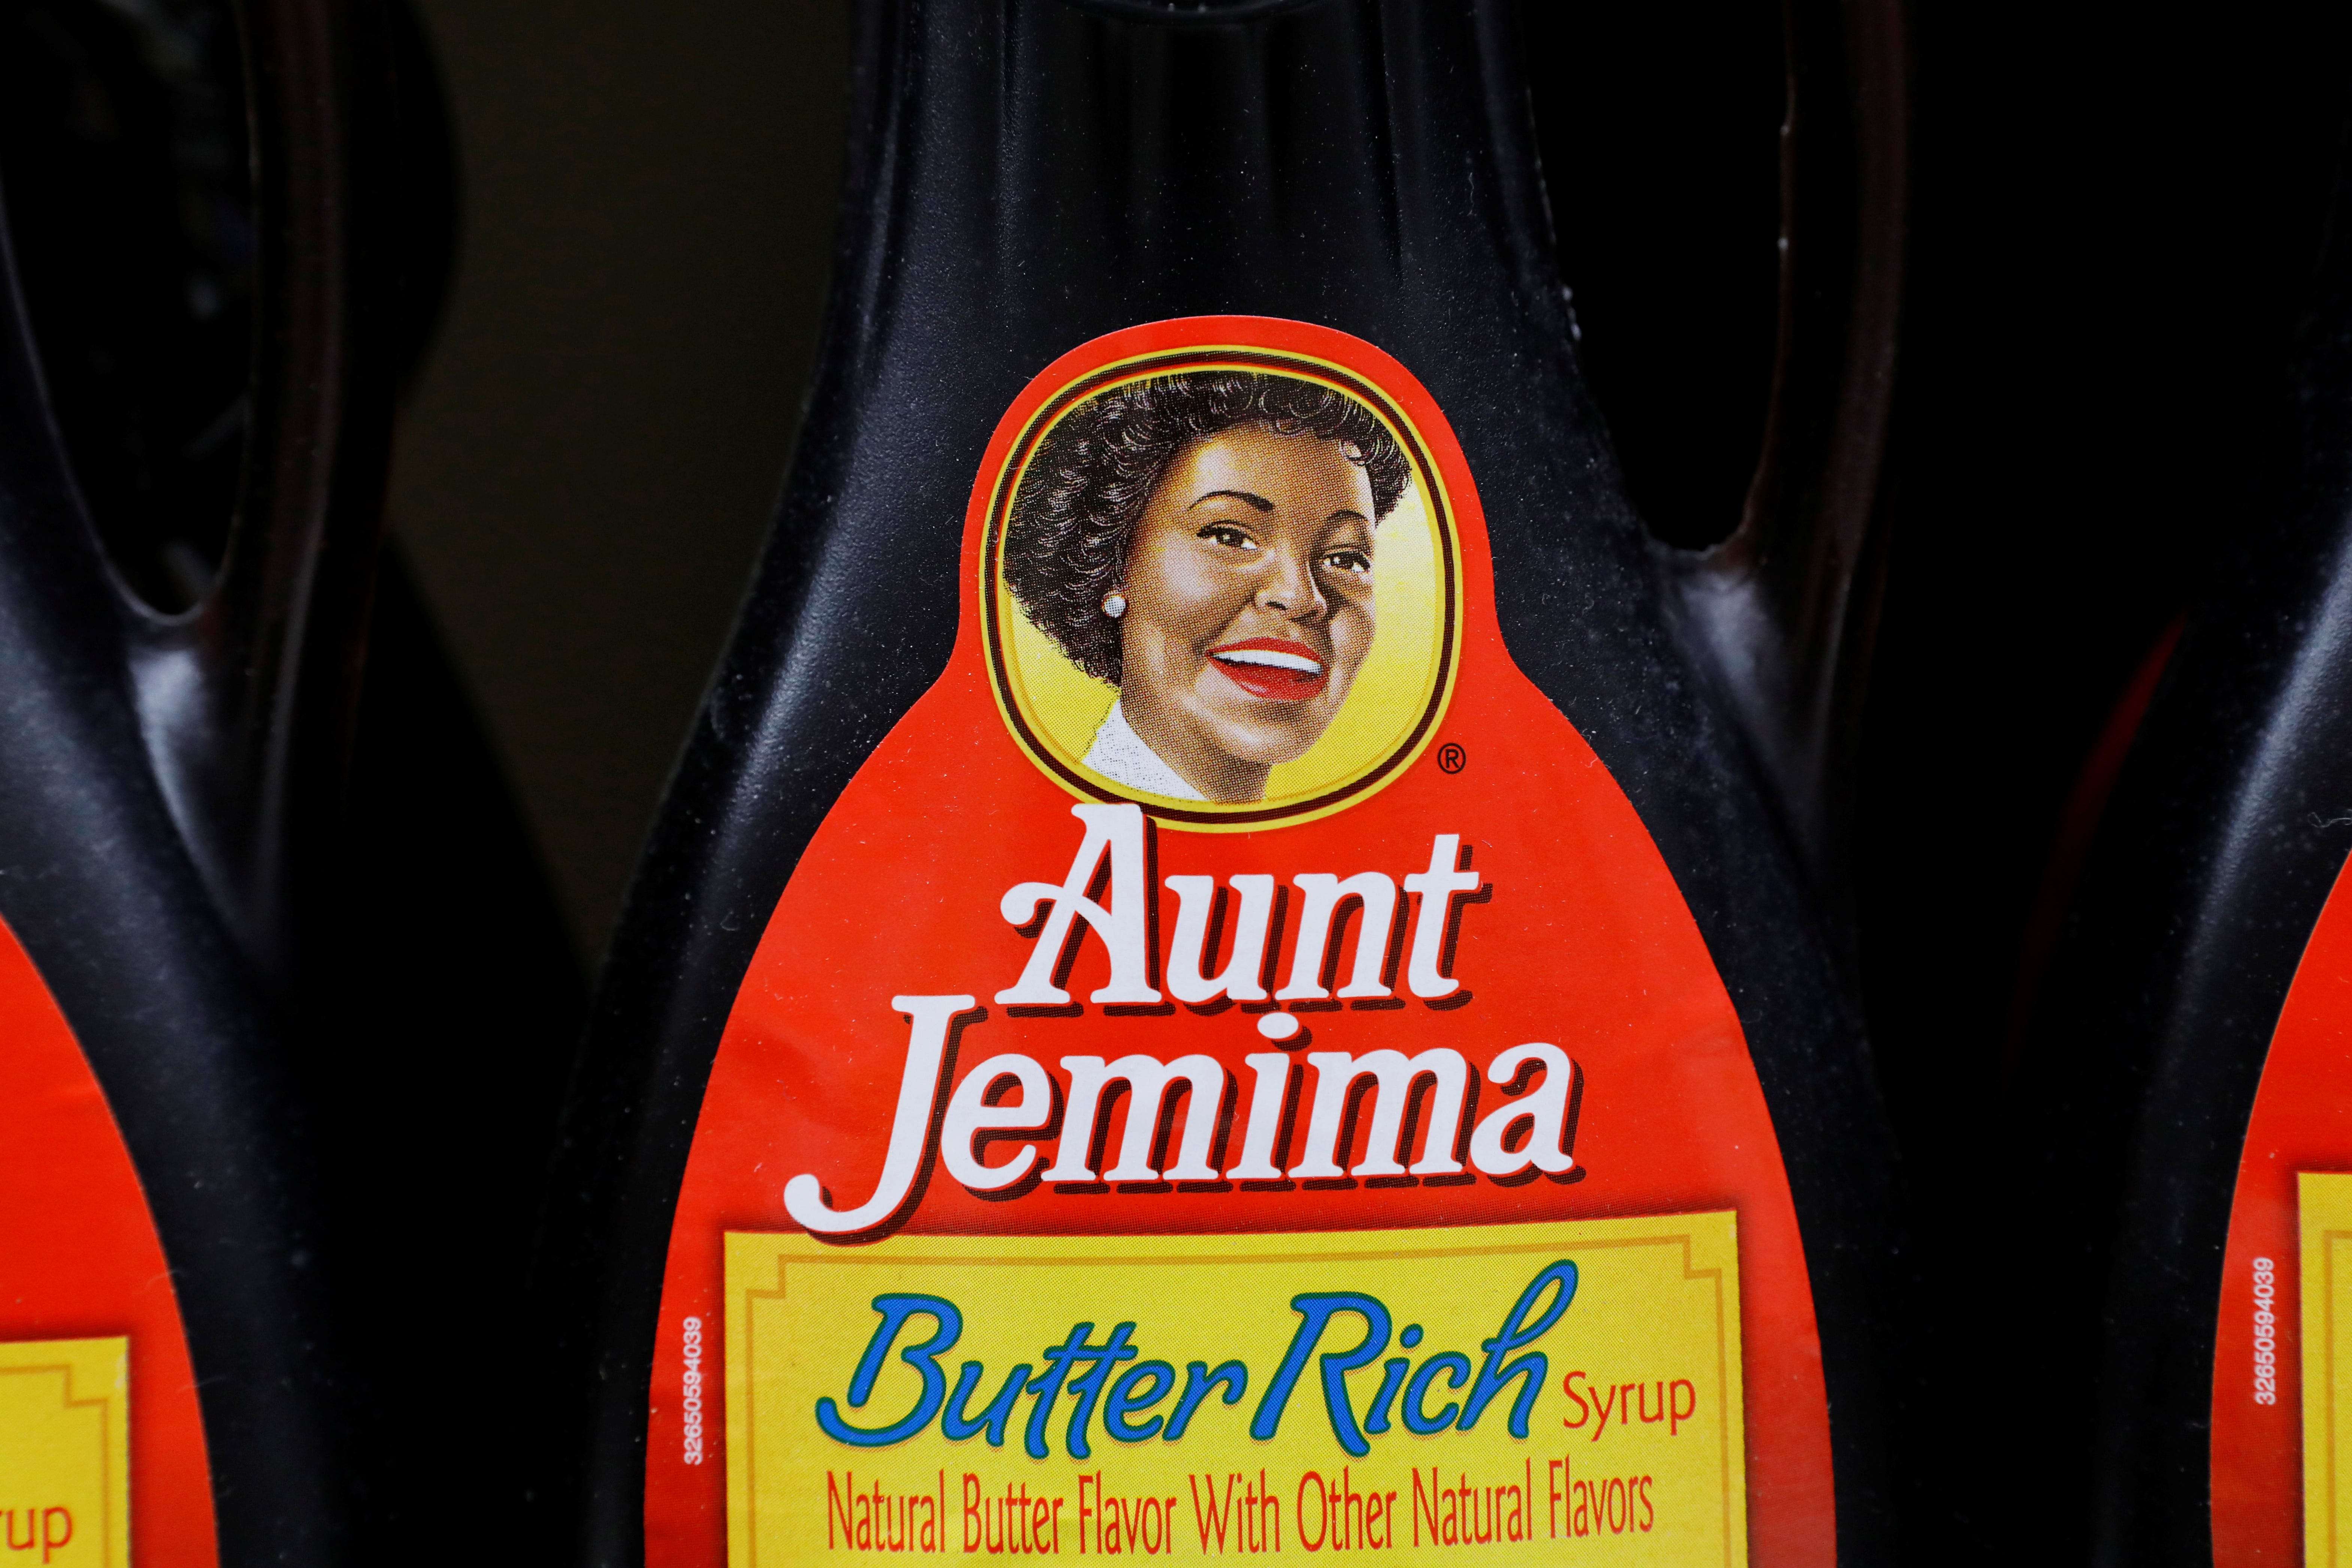 Aunt Jemimas Logo Has Changed 6 Times And Its History Is Rooted In Racial Stereotypes And Slavery Check Out How The Brand Started And Evolved Over 130 Years 